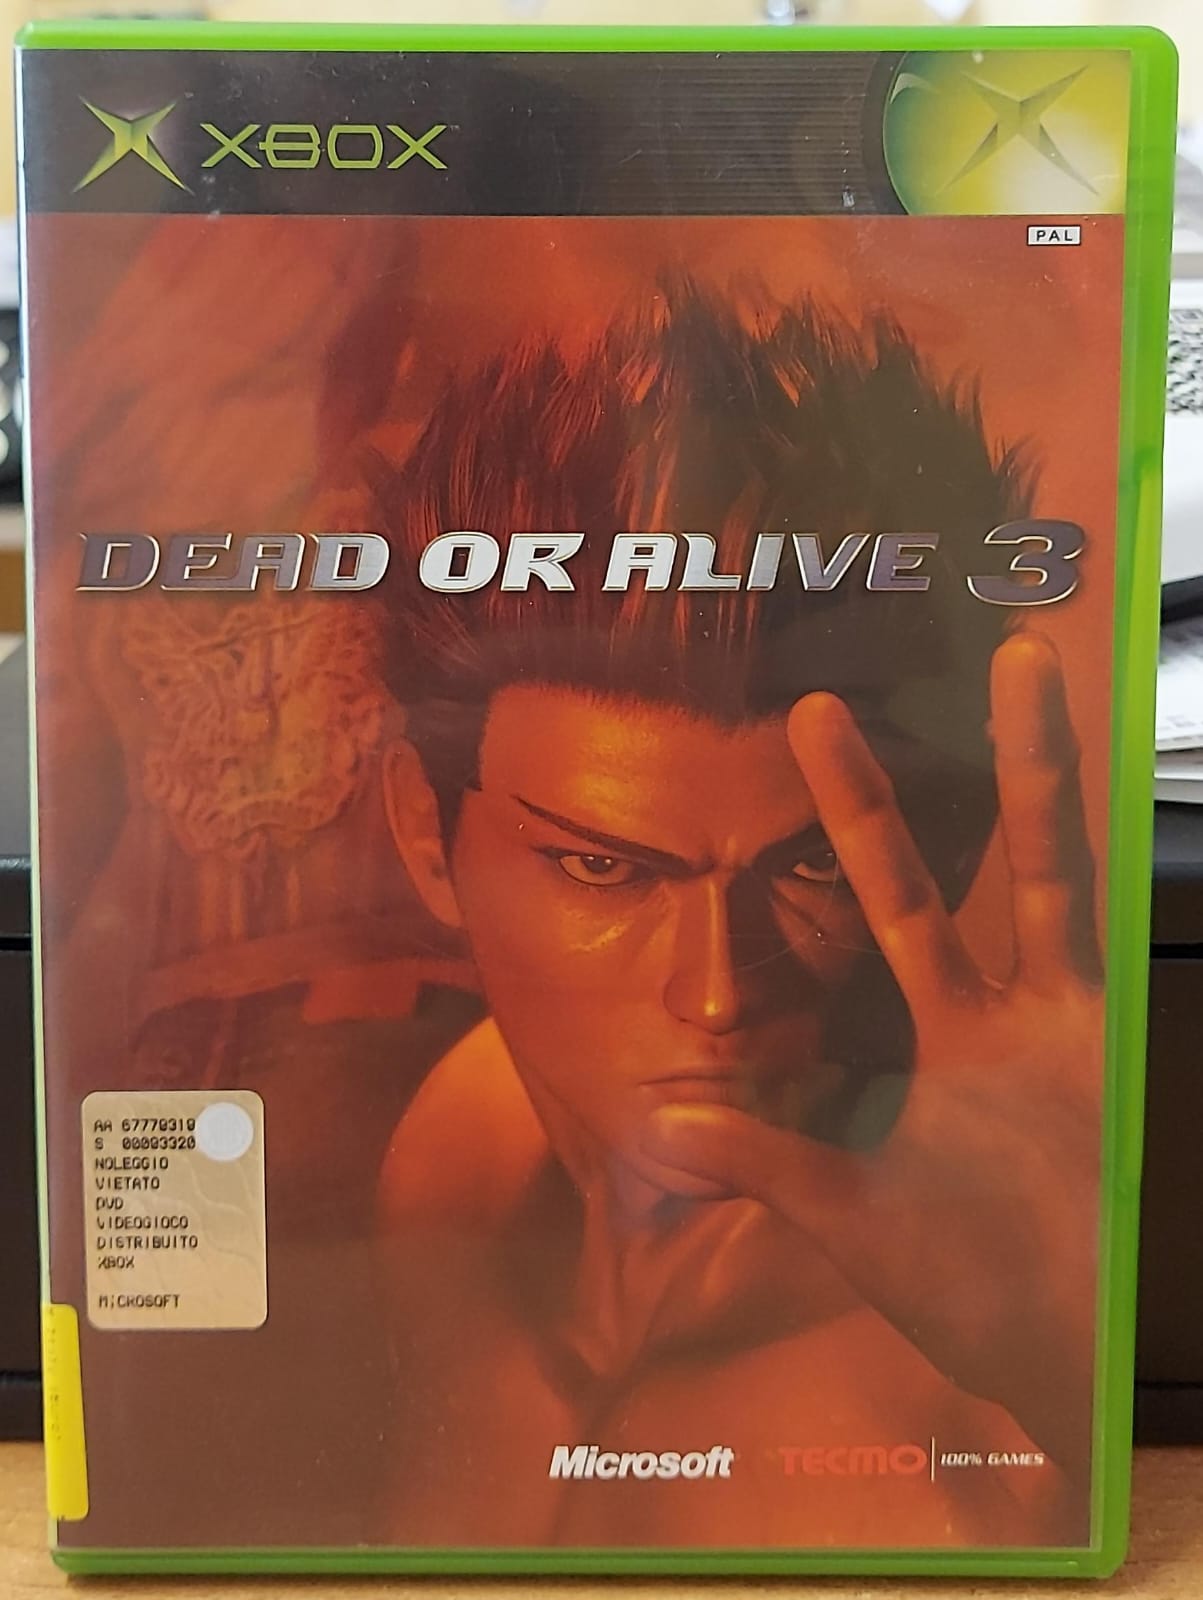 DEAD OR ALIVE 3